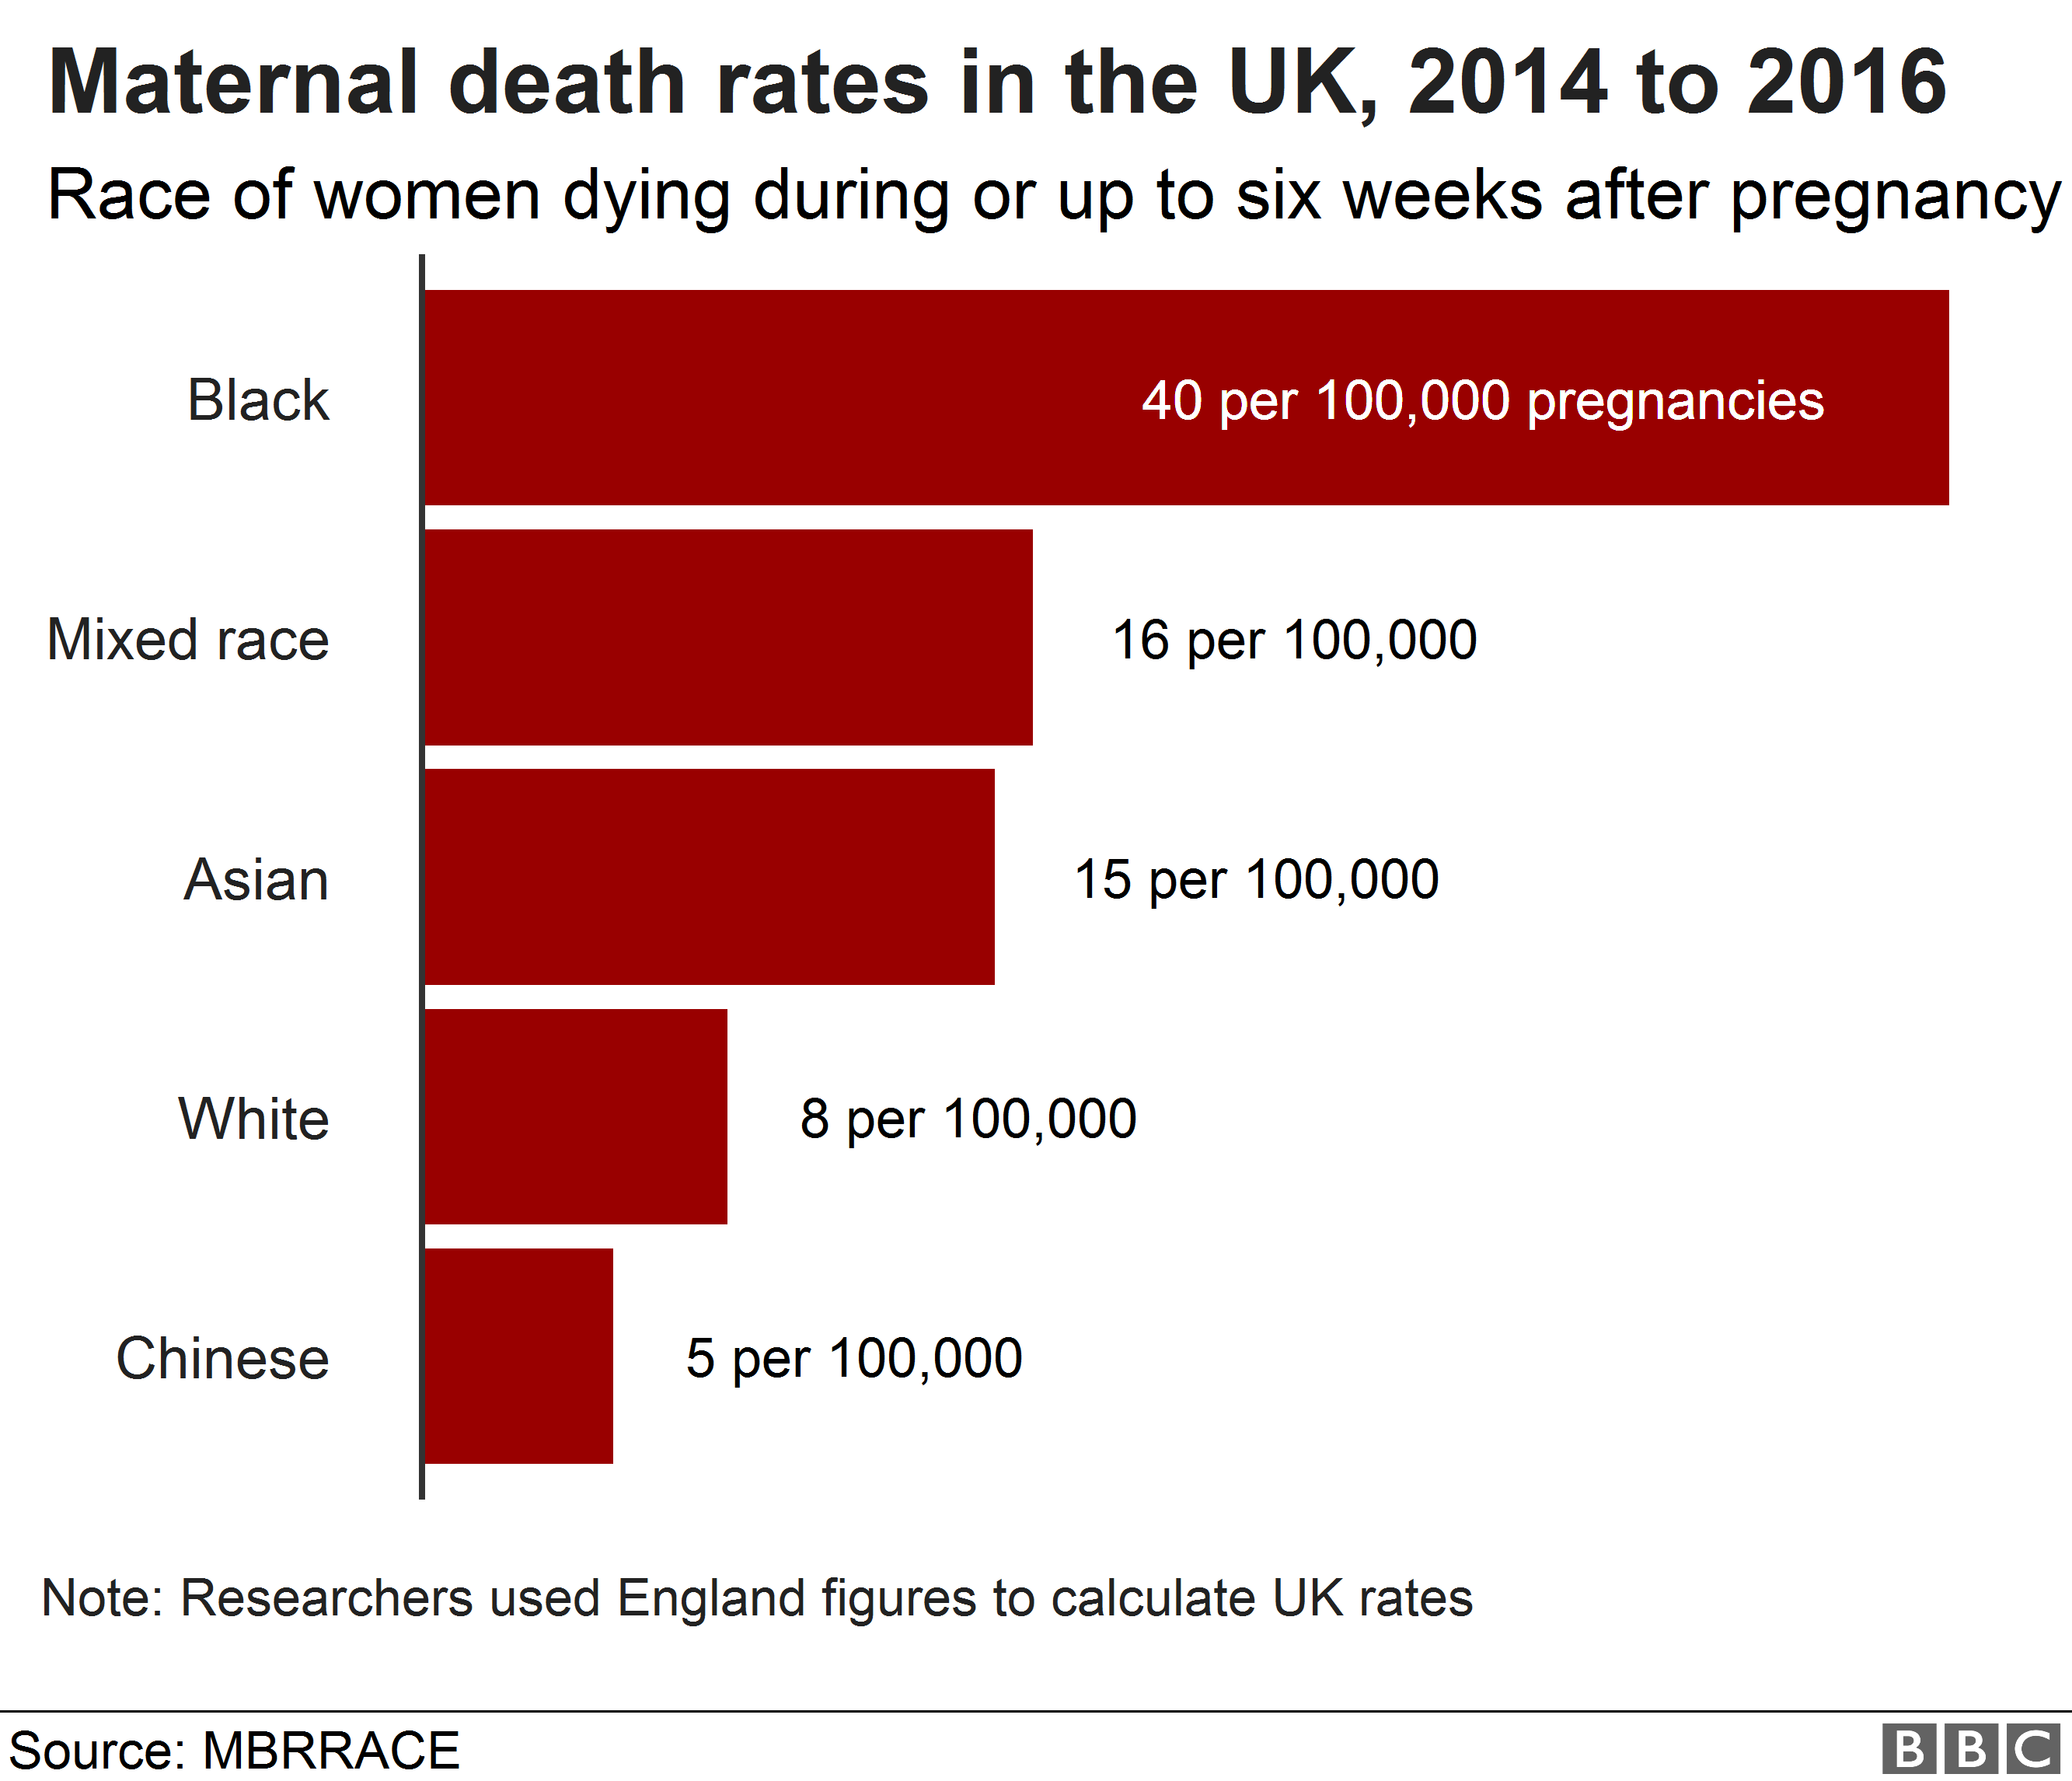 Chart showing maternal death rates